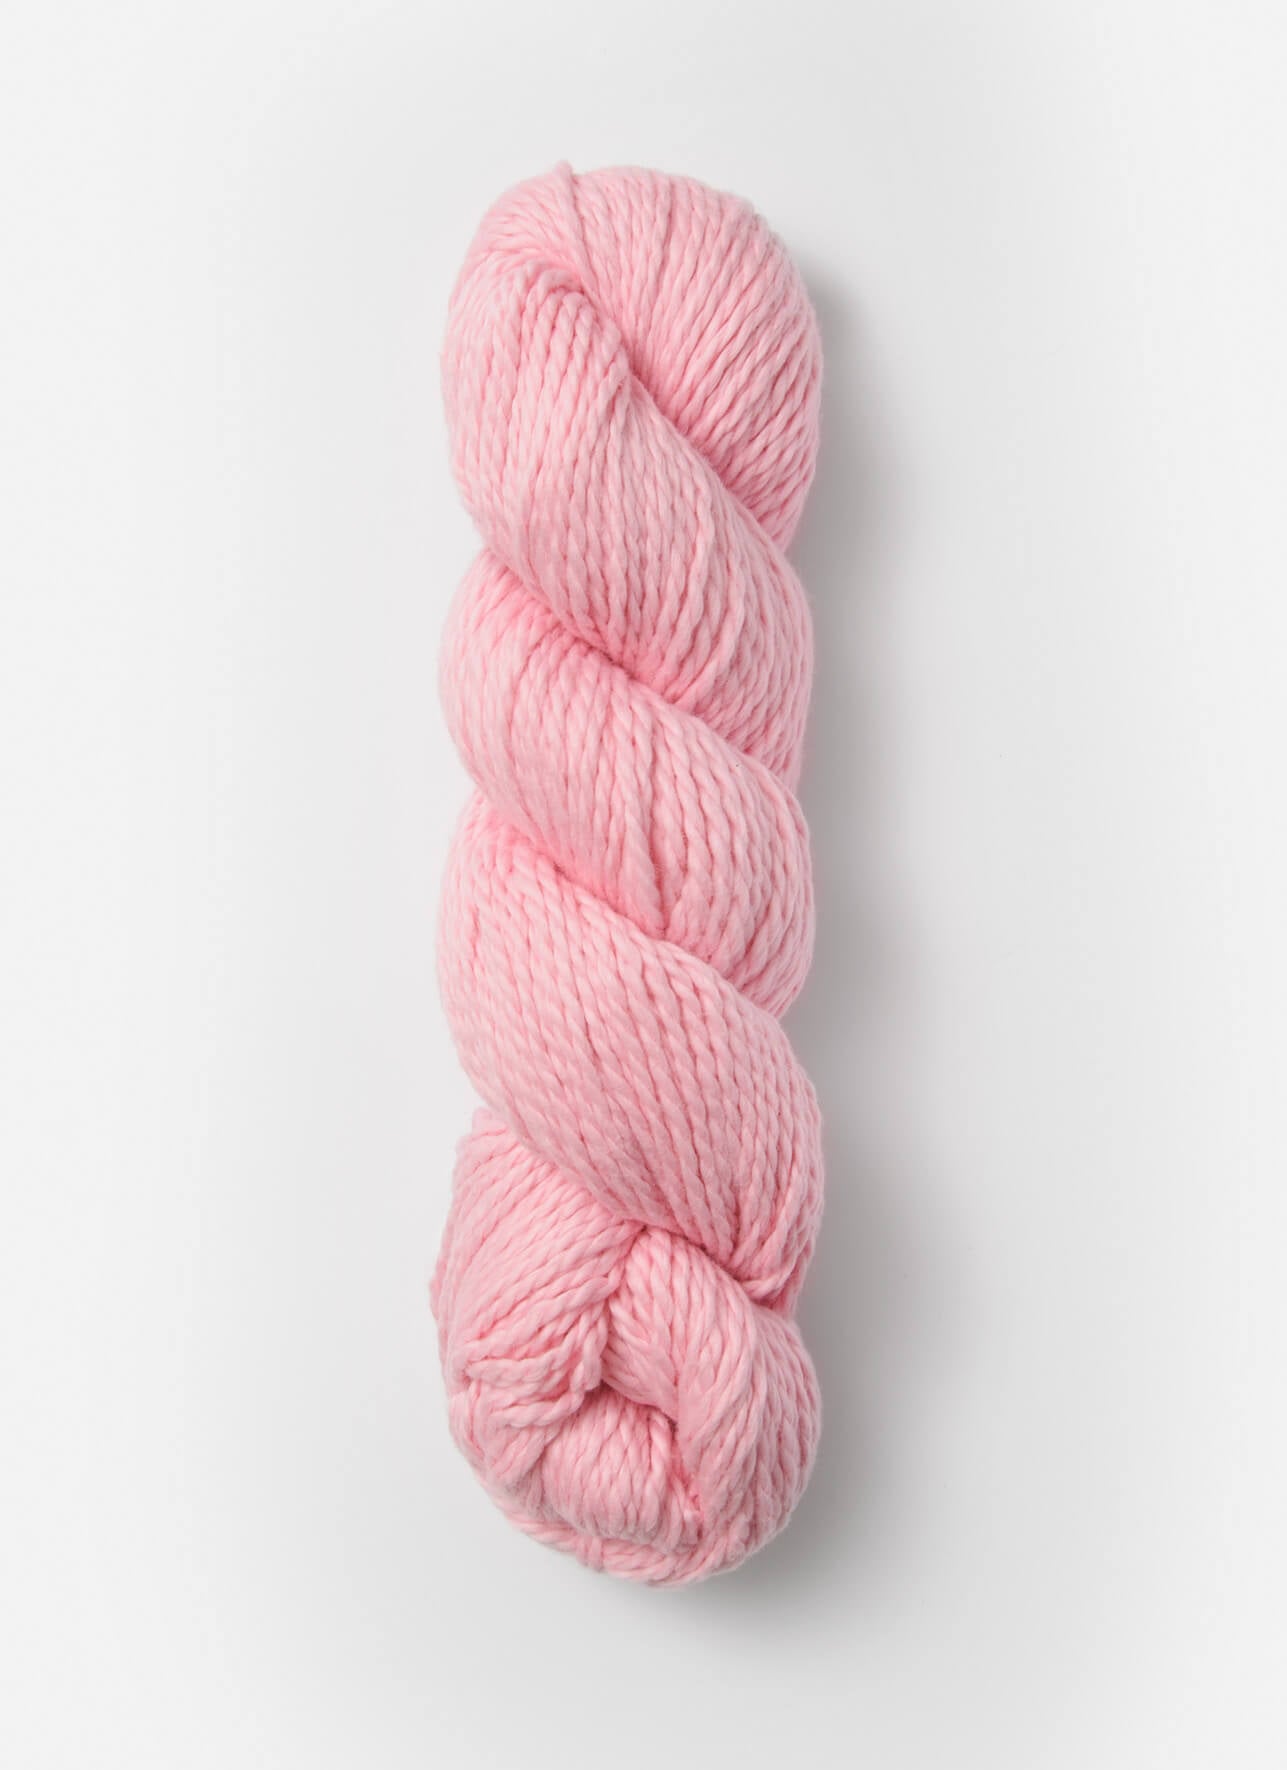 Organic Cotton Worsted from Blue Sky Fibers